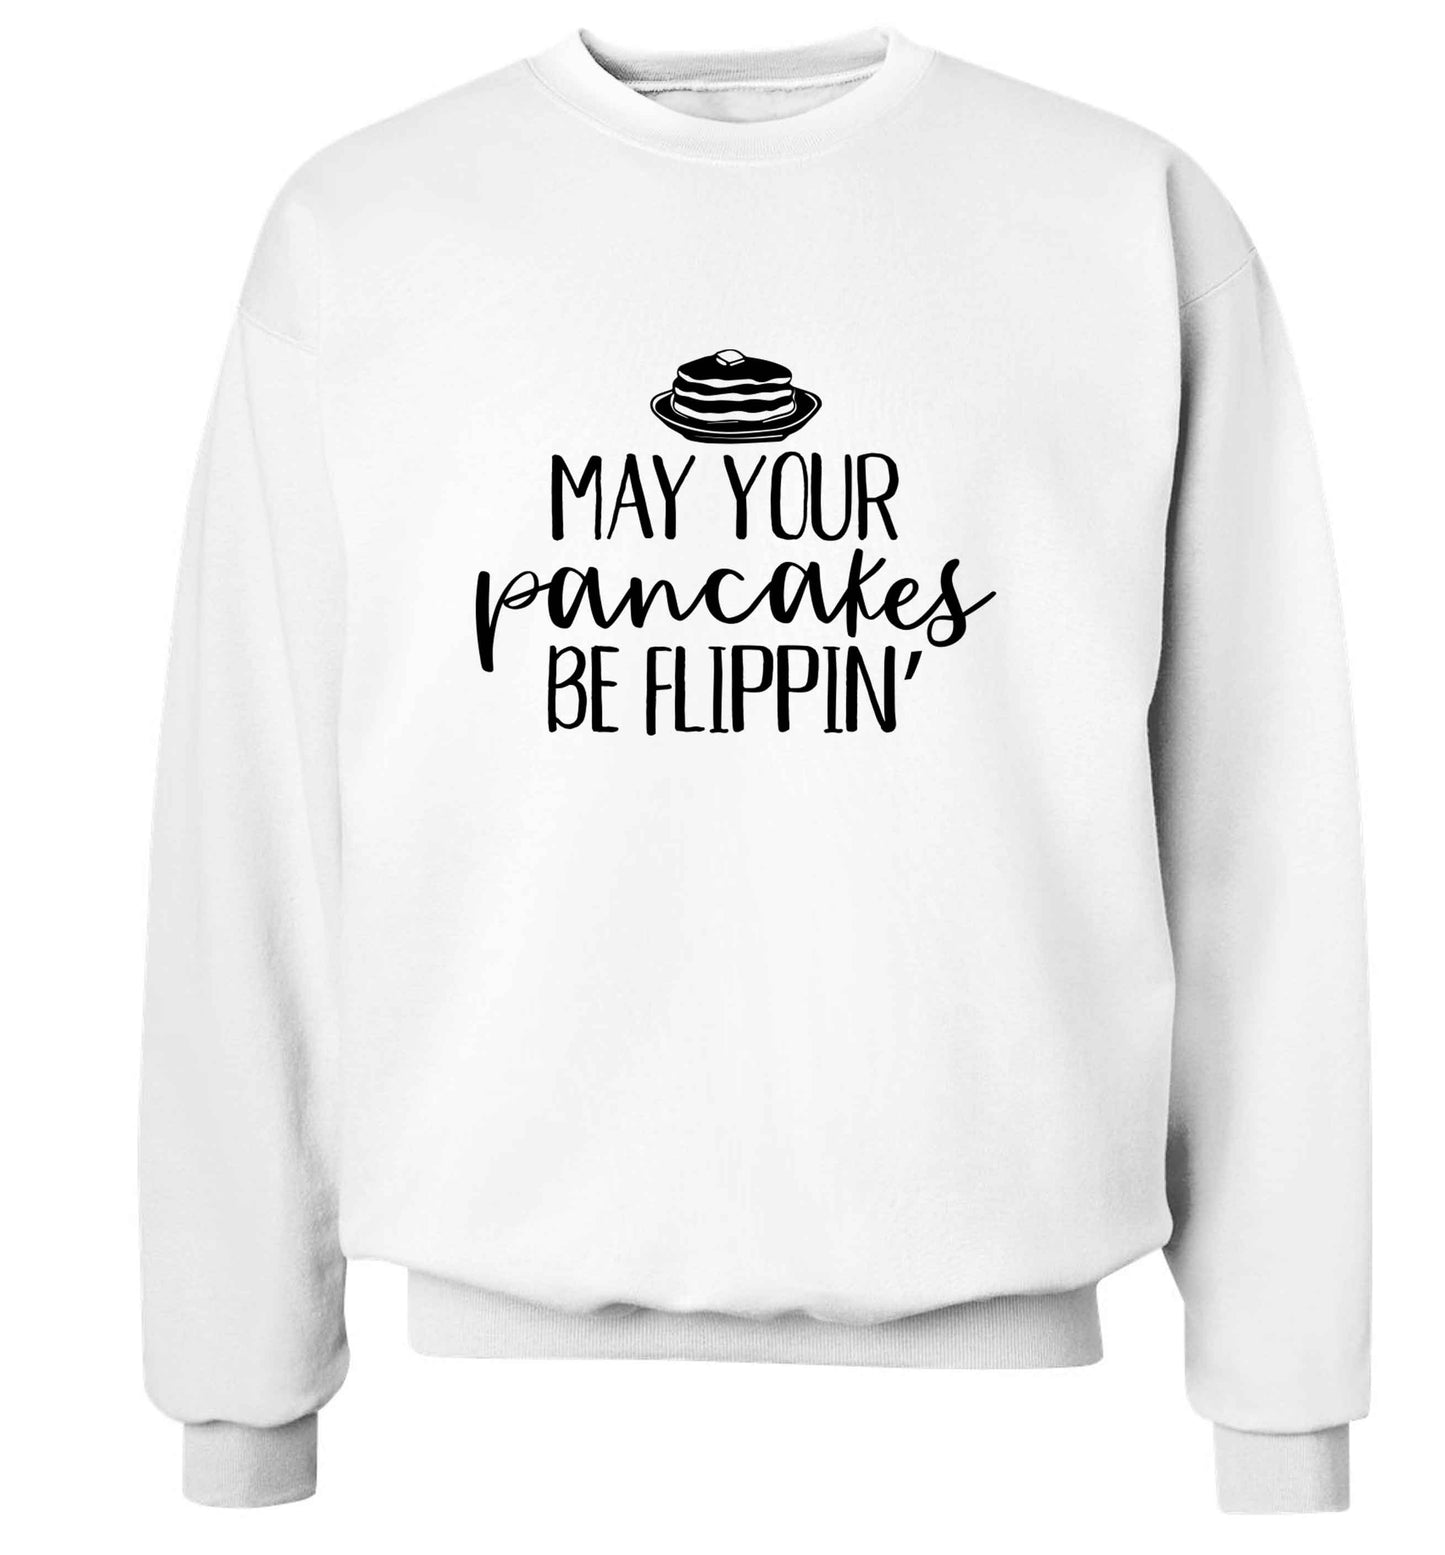 May your pancakes be flippin' adult's unisex white sweater 2XL